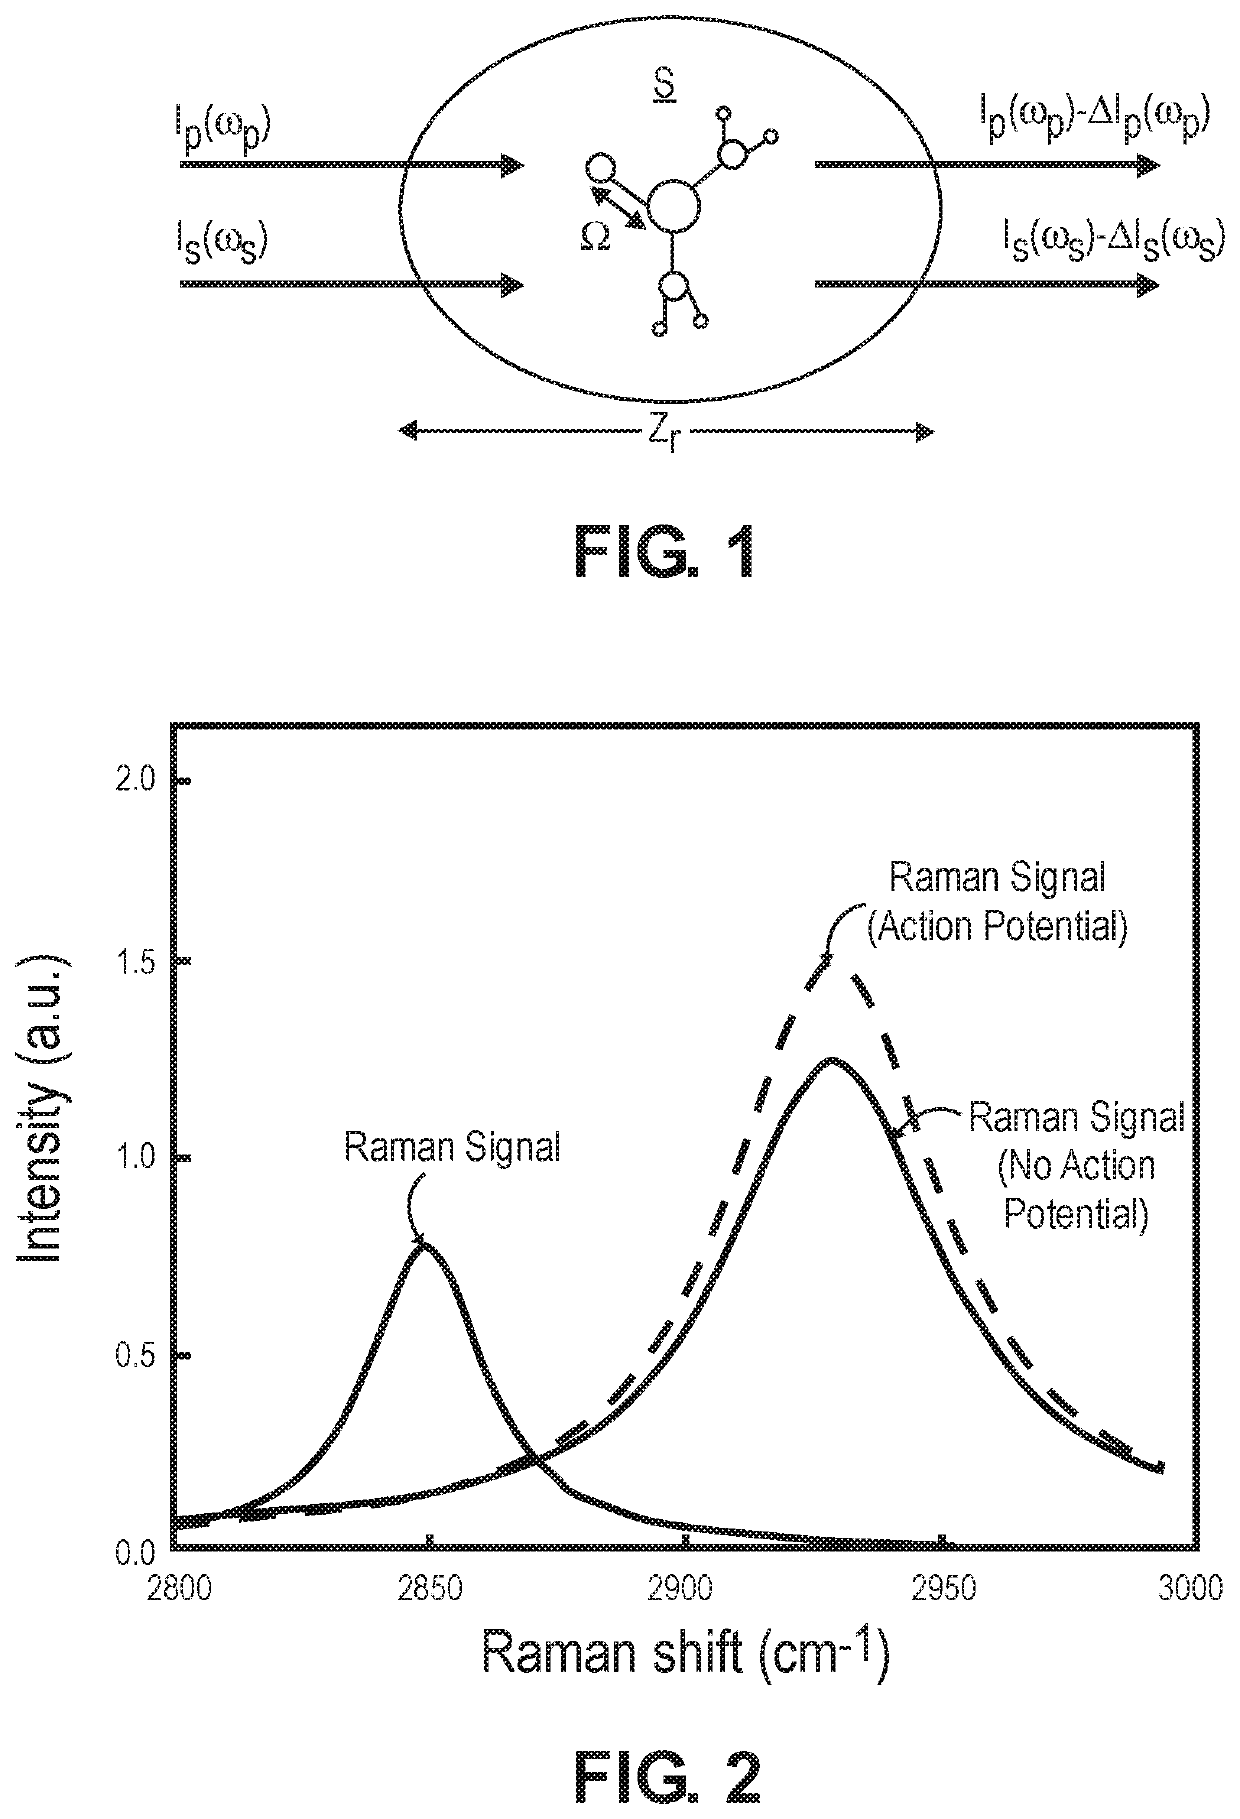 Detection of fast-neural signal using depth-resolved spectroscopy